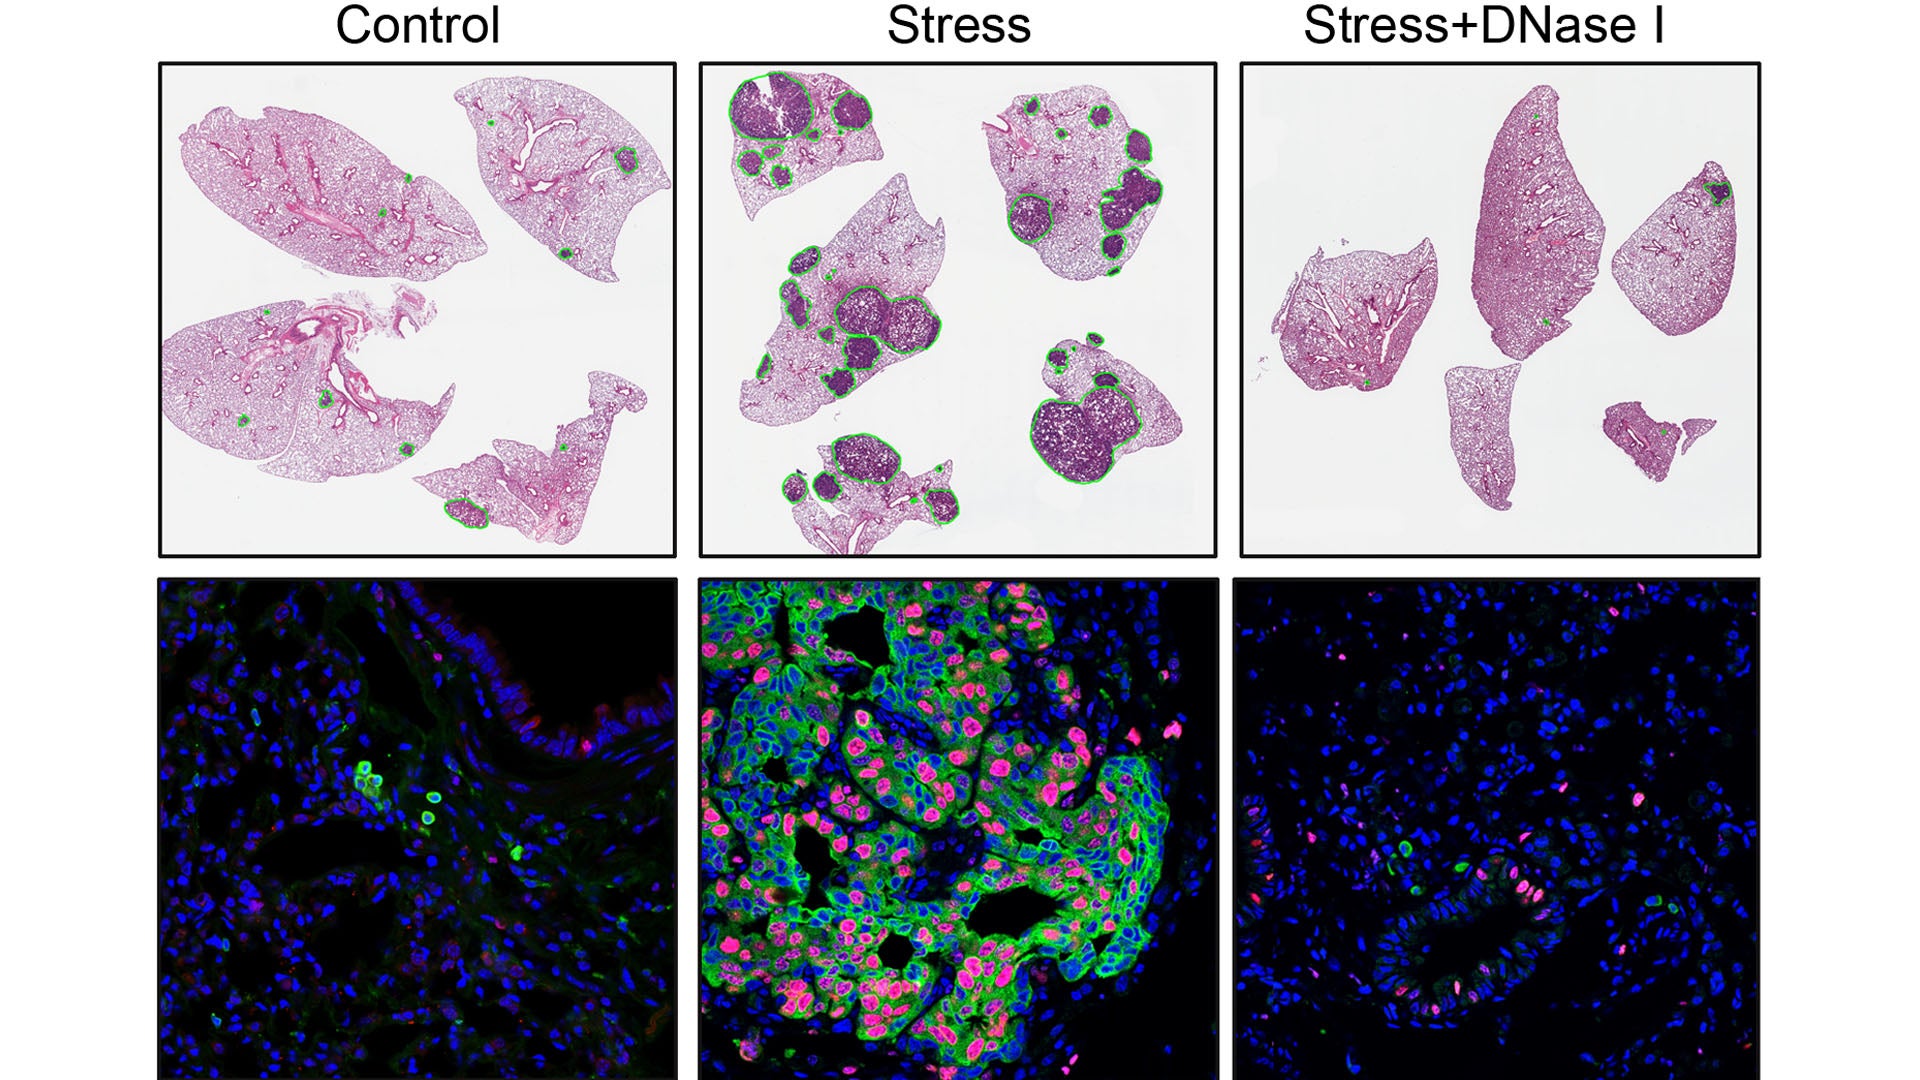 Image of comparisons in cancer growth with low stress, high stress, and DNase I